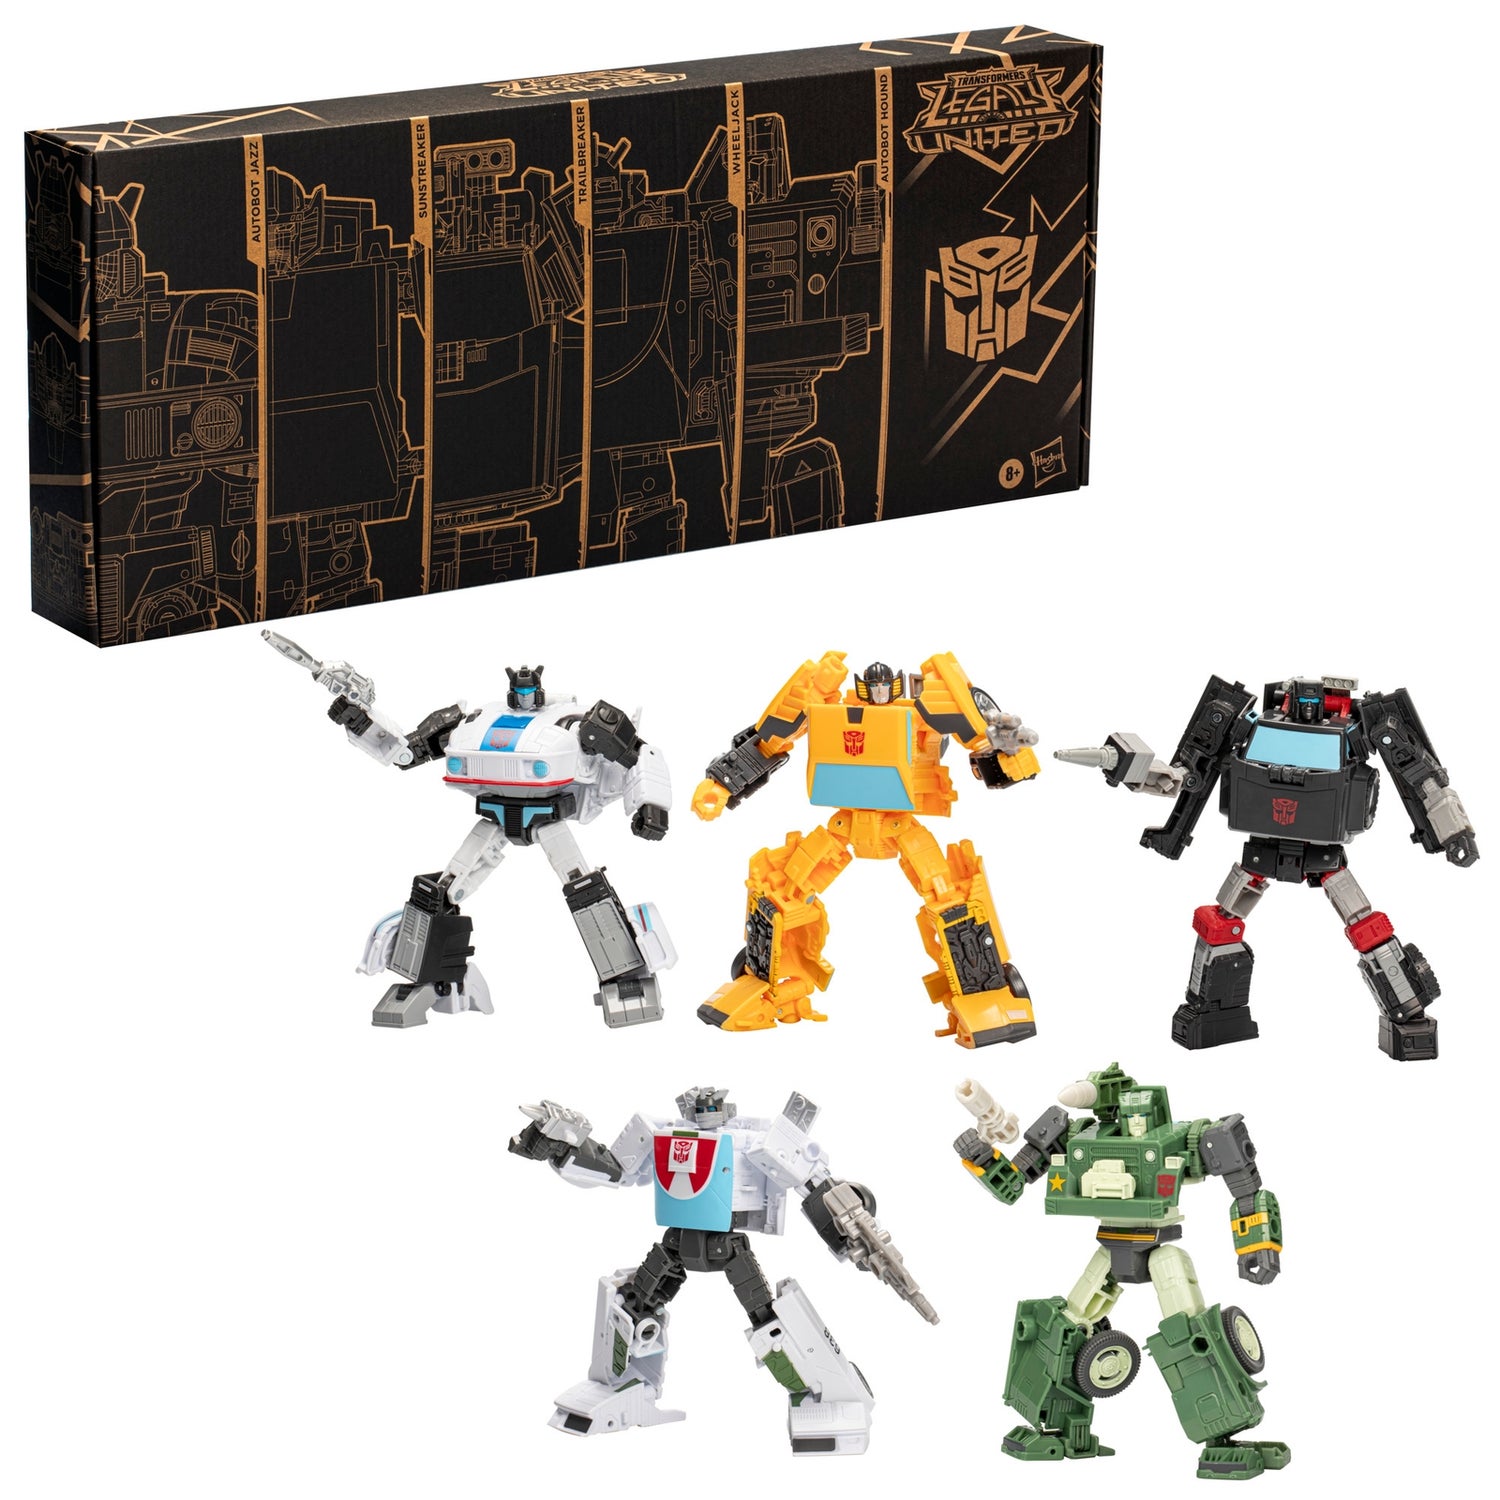 Hasbro Transformers Generations Selects Autobot Multi-Pack Action Figures